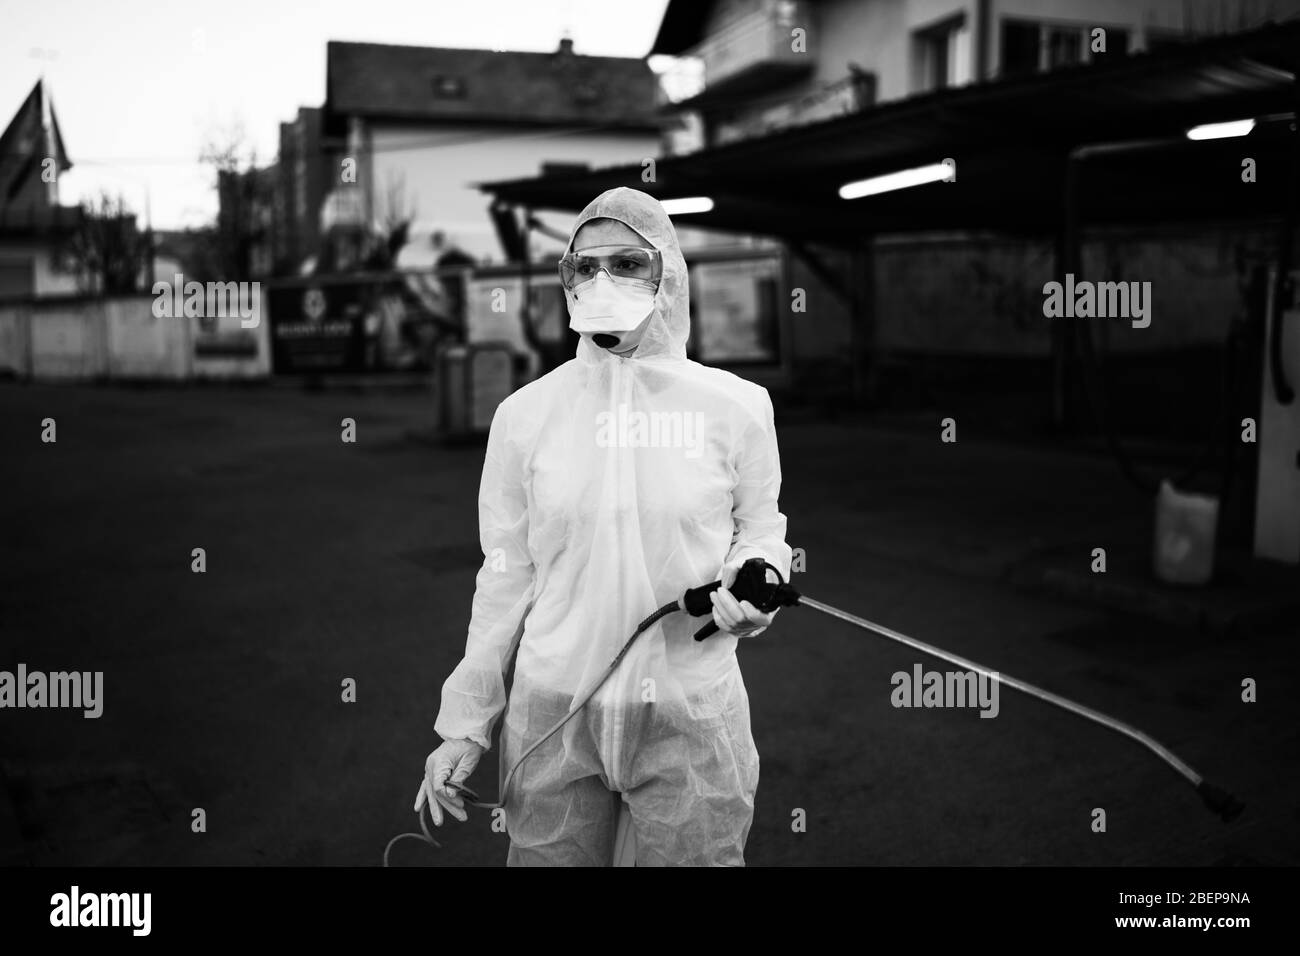 Sanitation service worker spraying disinfectant with a spray gun in hazmat suit,N95 mask and protective gear.Private protective equipment (PPE).Quaran Stock Photo